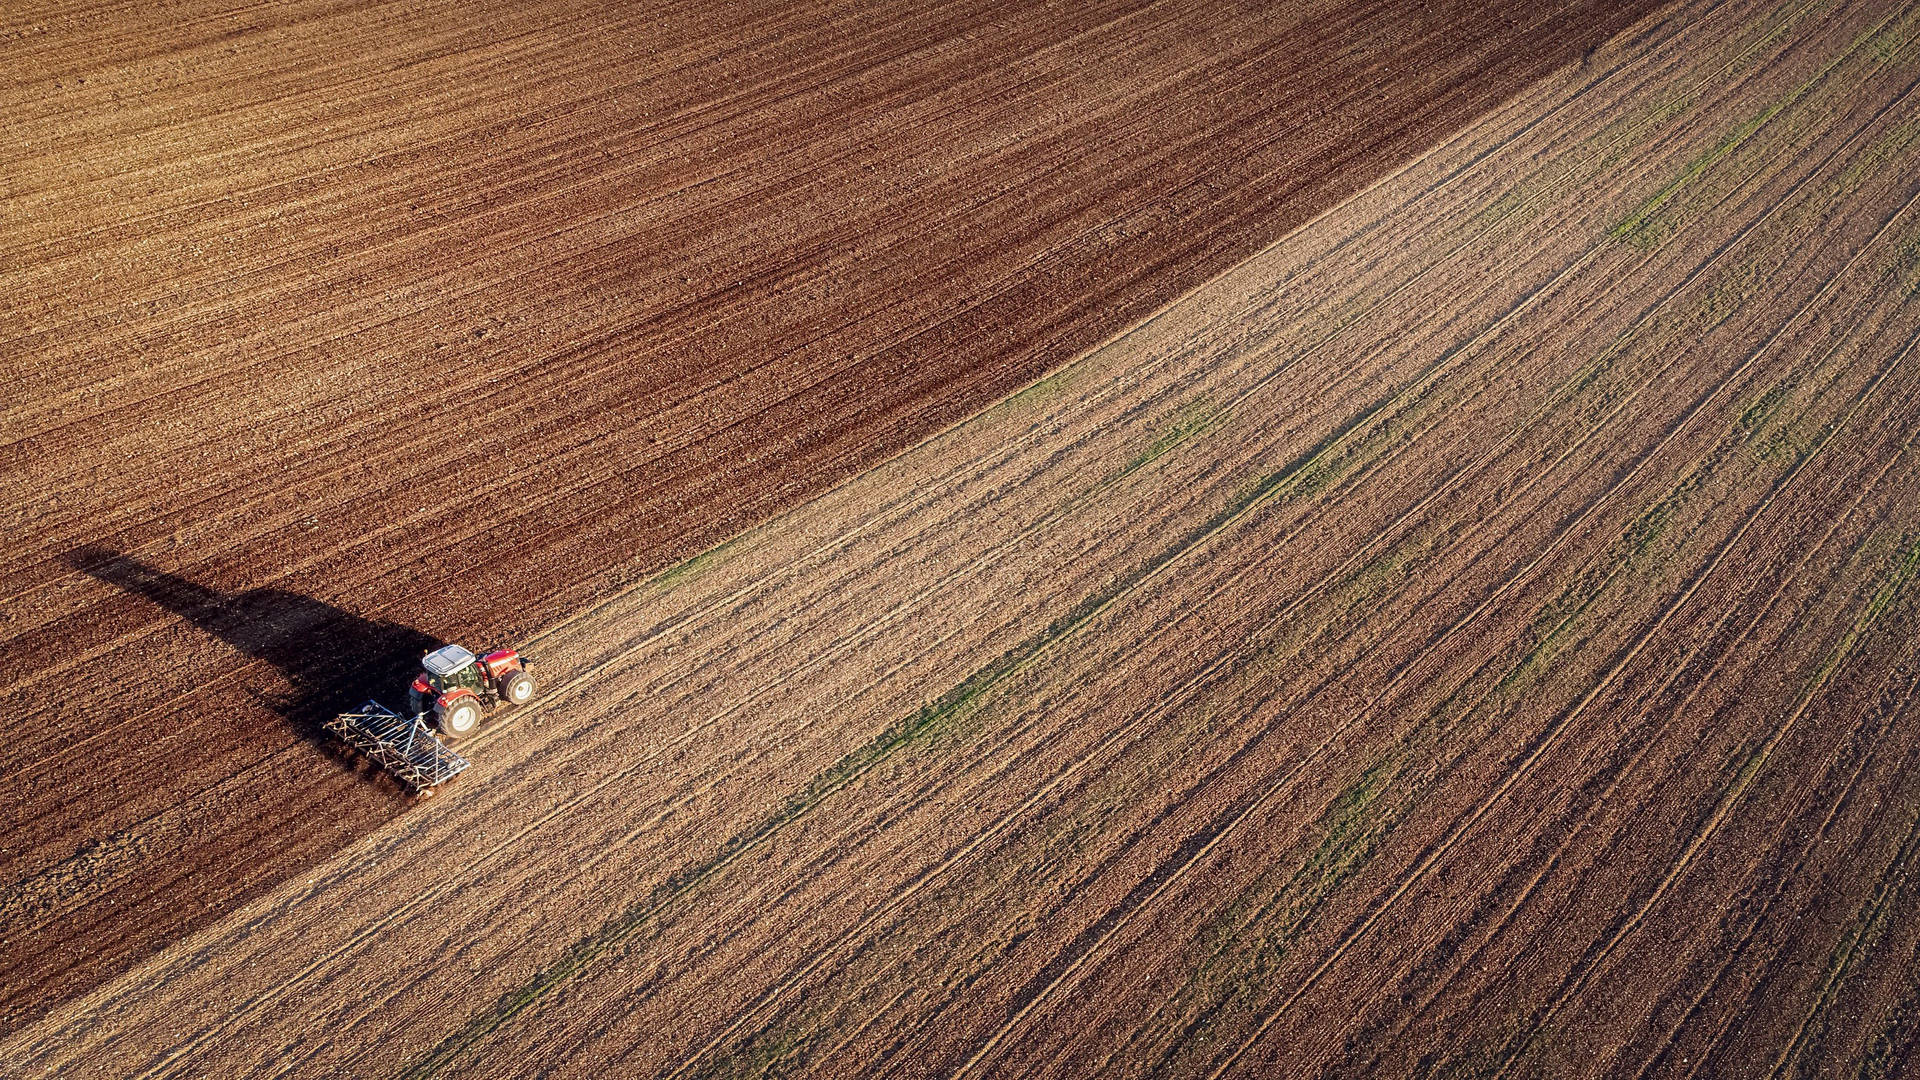 Aerial View Of Tractor On The Field Wallpaper